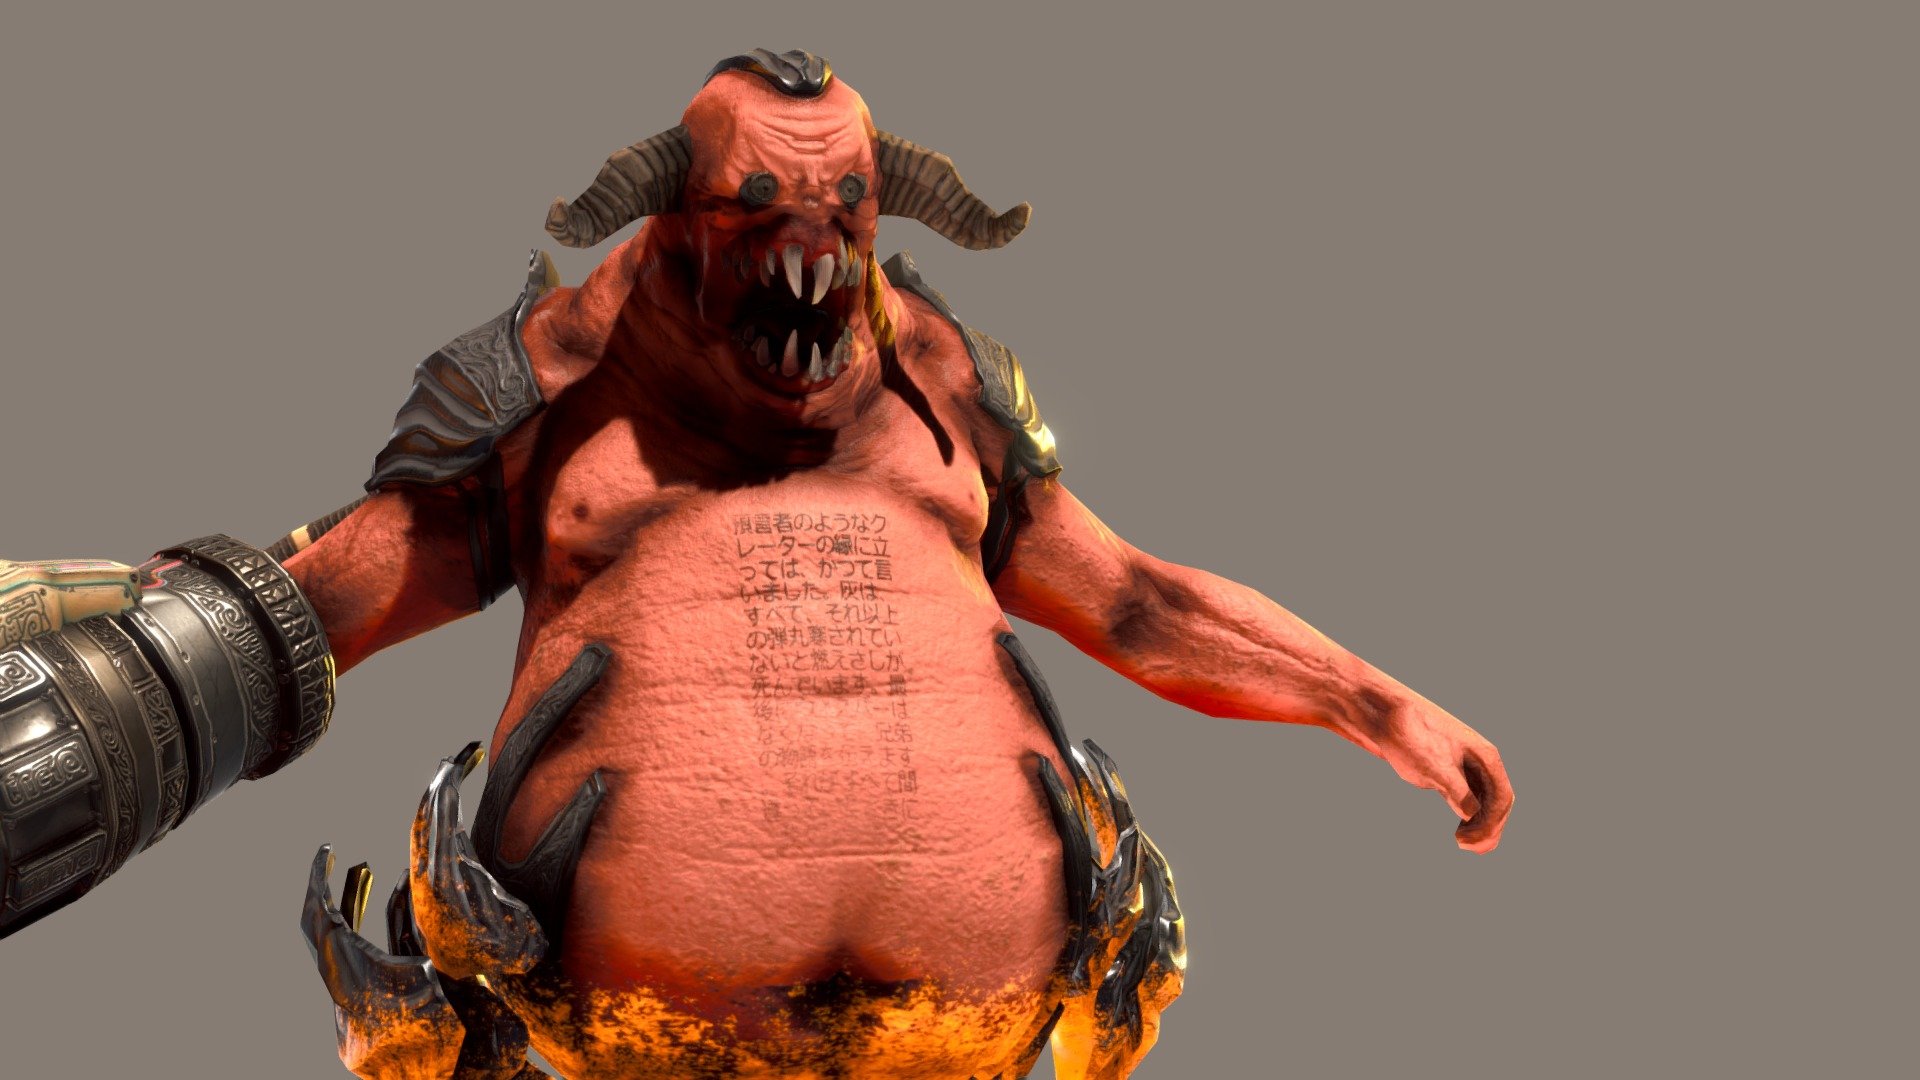 Hell Boss - Idle - 3D model by Trung Cao (@trung23) 3d model